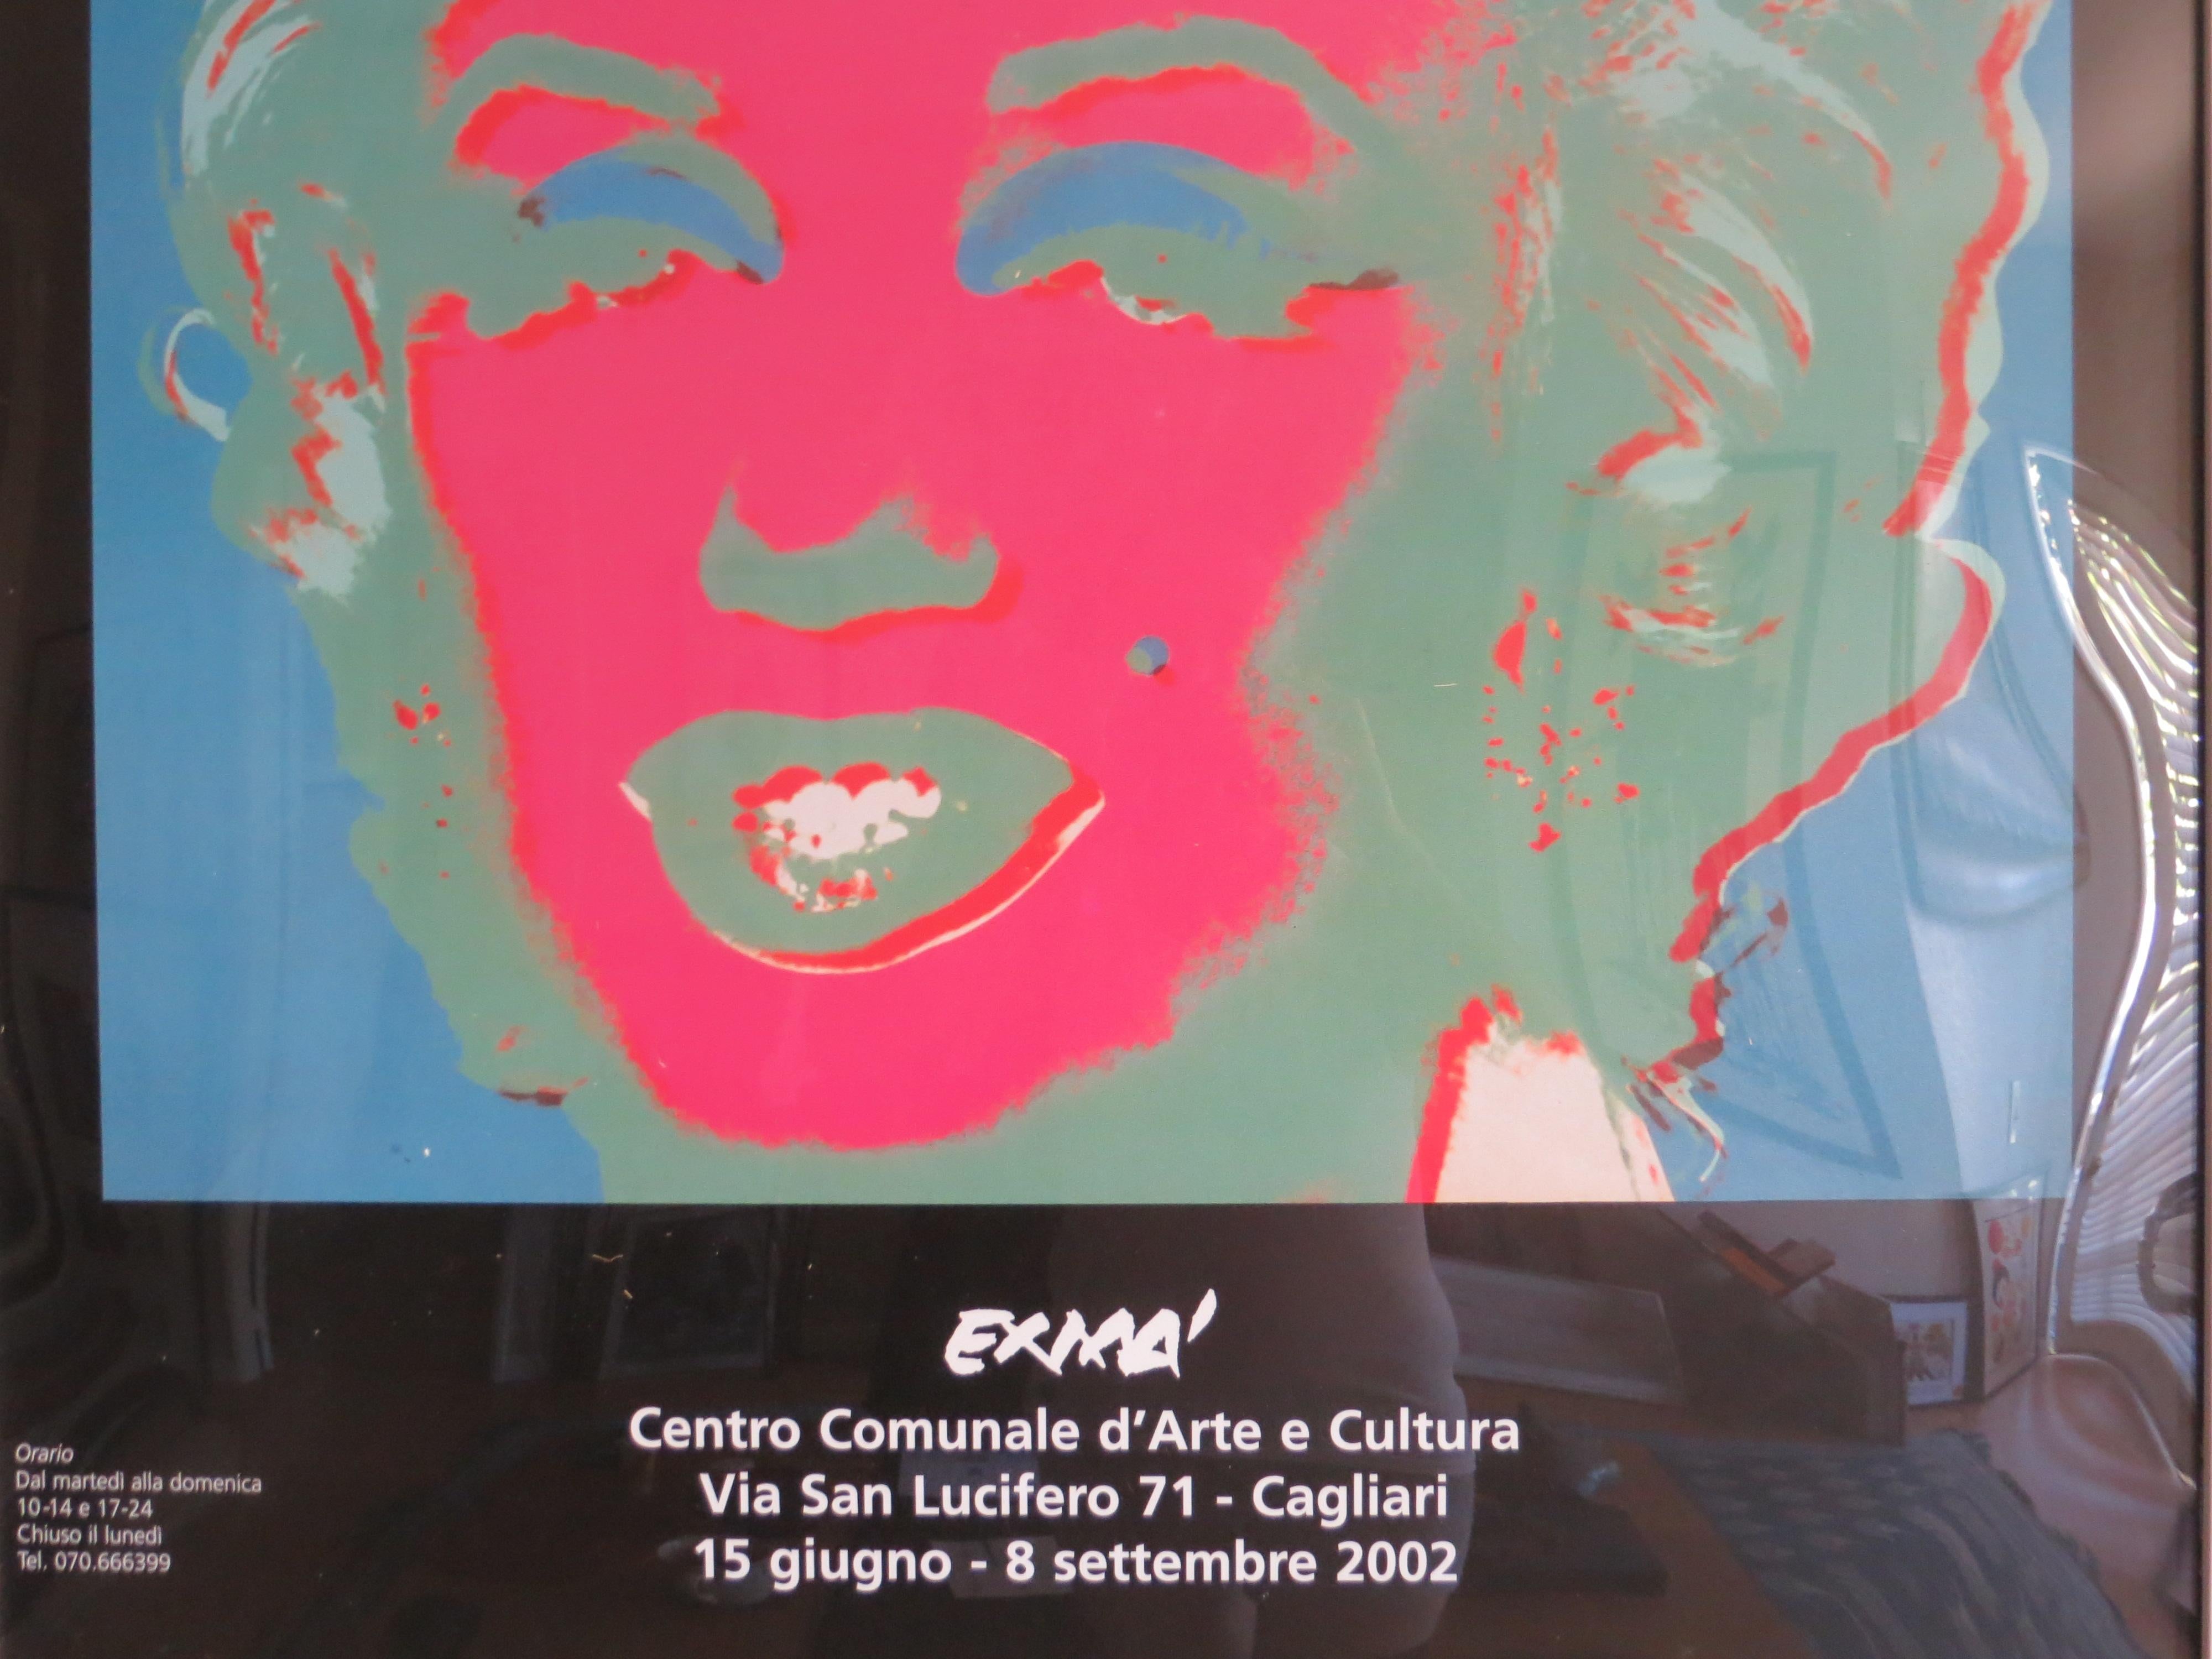 
Andy Warhol  Exma Marilyn 2003 on linene Vintage Vintage 2003 Pop Art Poster.
 Framed .  Exhibition Poster lithograph print custom framed  , is an incredibly special and unique piece to add to your collection.
Warhol's most unique works, although